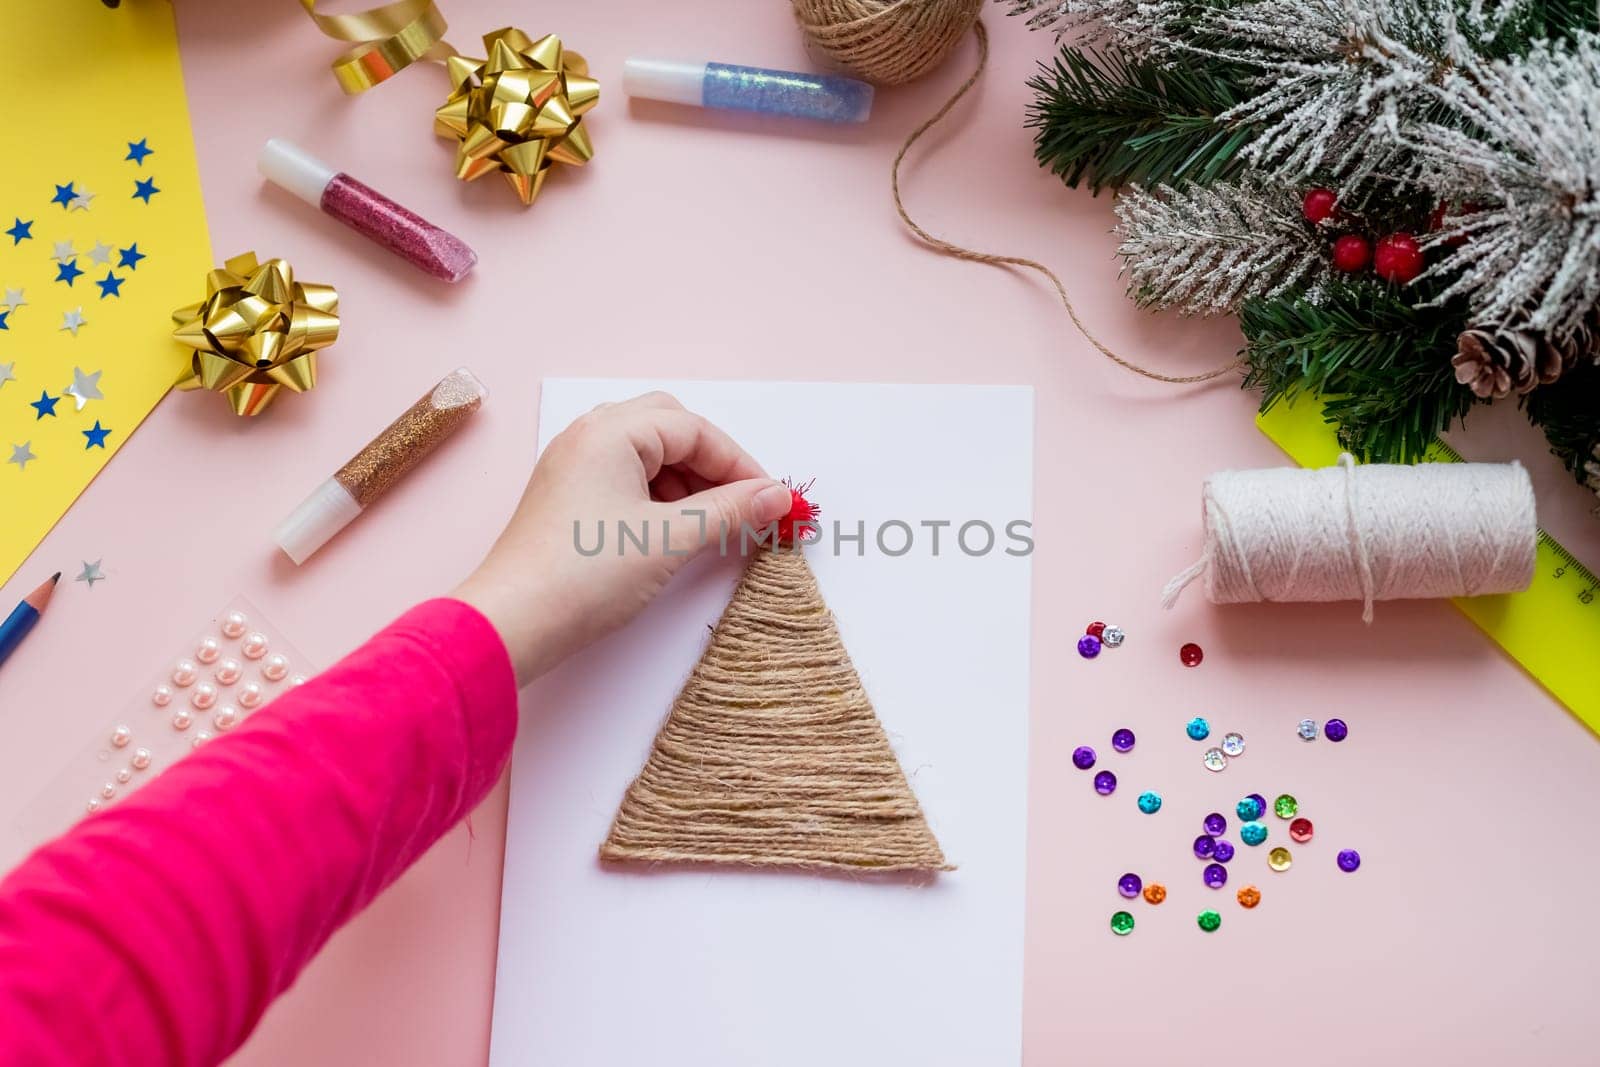 DIY concept. How to make Christmas card. New Year idea for children. Step-by-step photo instructions.